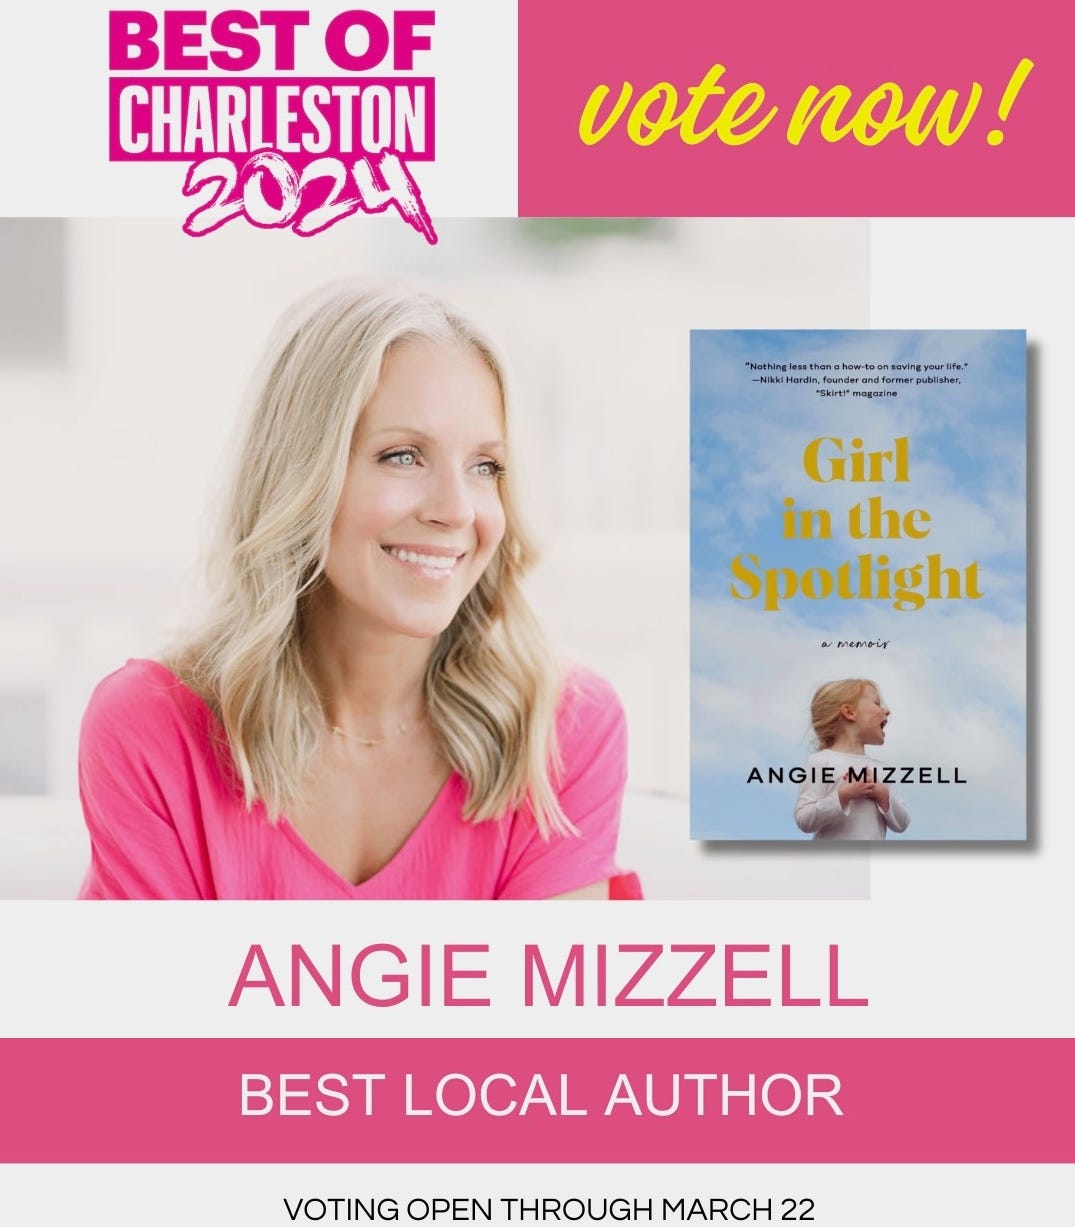 Angie Mizzell Best Local Author